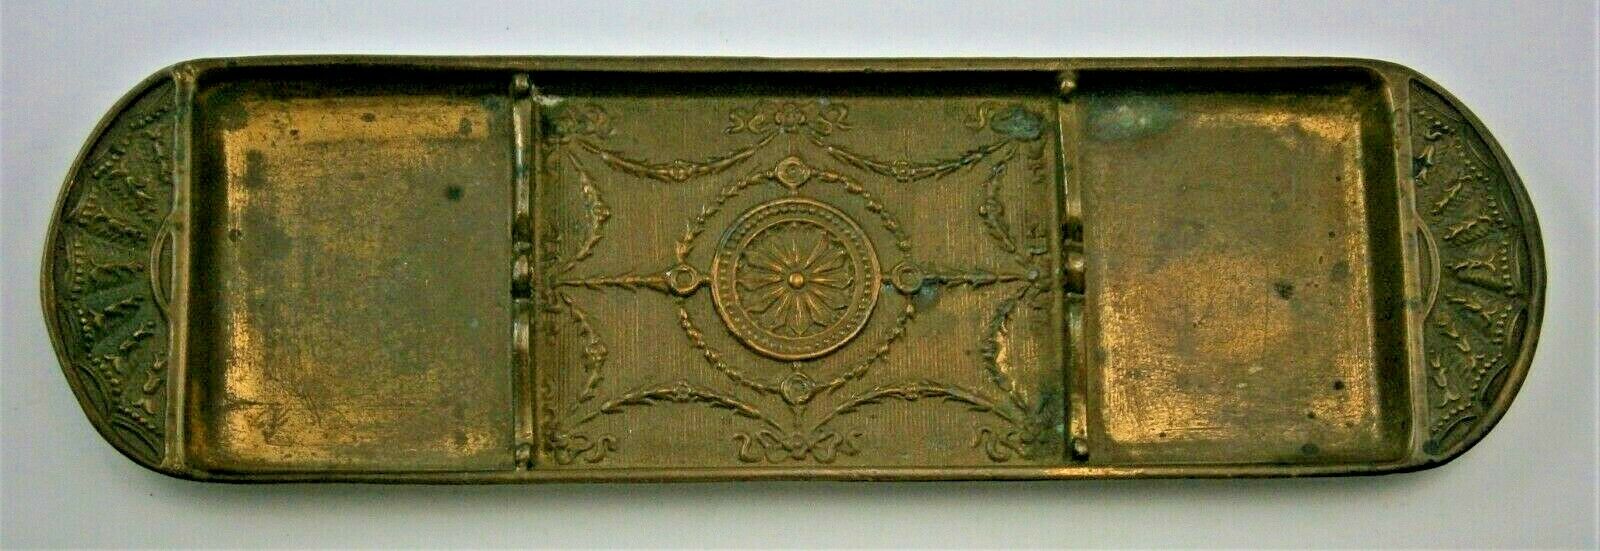 Cast Bronze Desk Pen Tray Numbered 1850 On Back From The Early 1900's Or Earlier